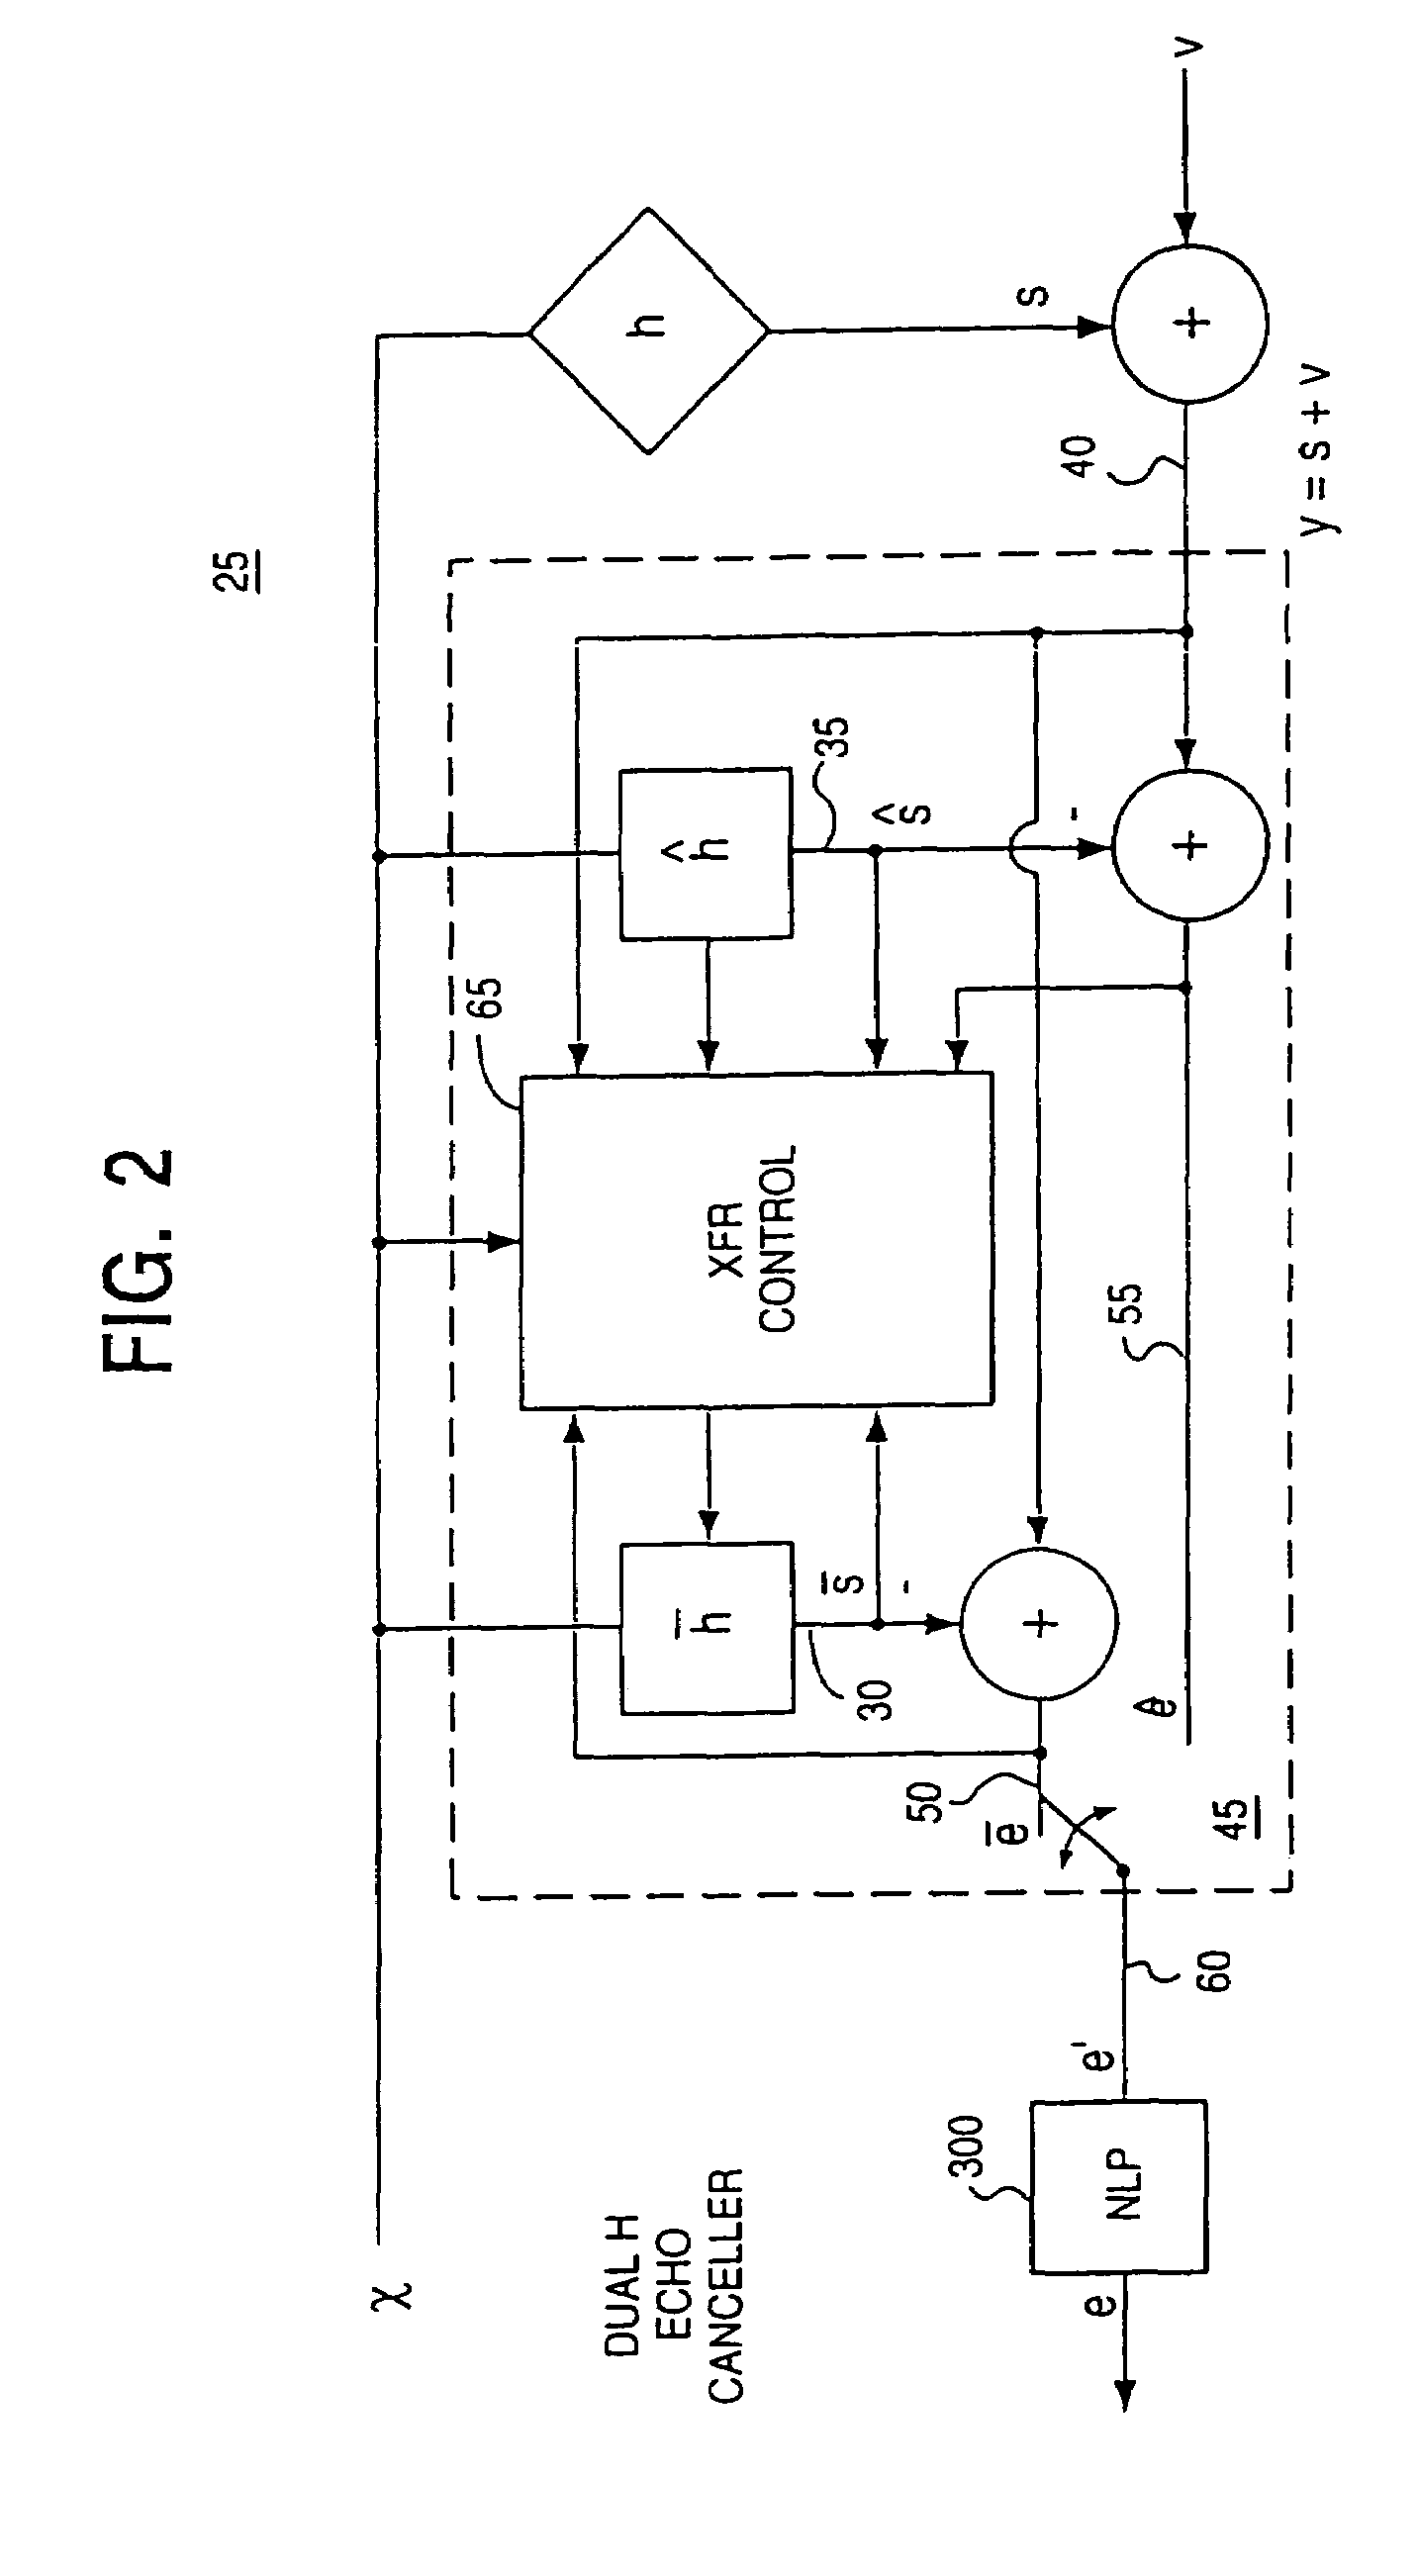 Echo canceller employing dual-H architecture having improved non-linear echo path detection